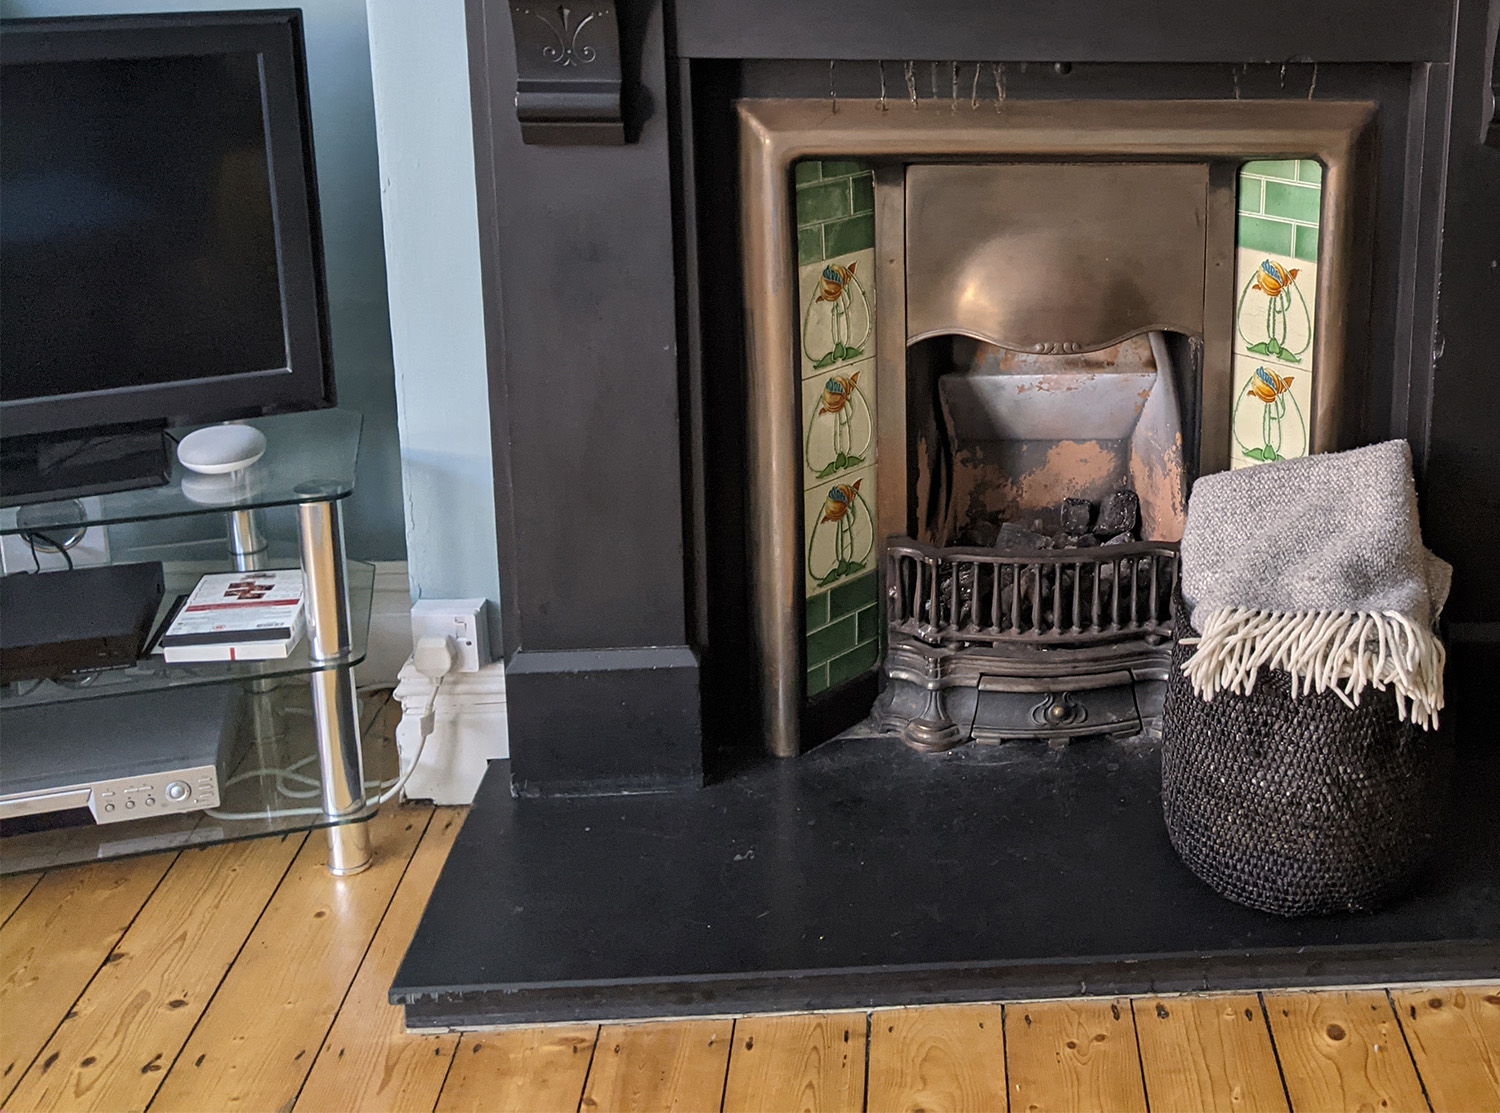 A photo showing the old plug socket on one side of the fireplace.